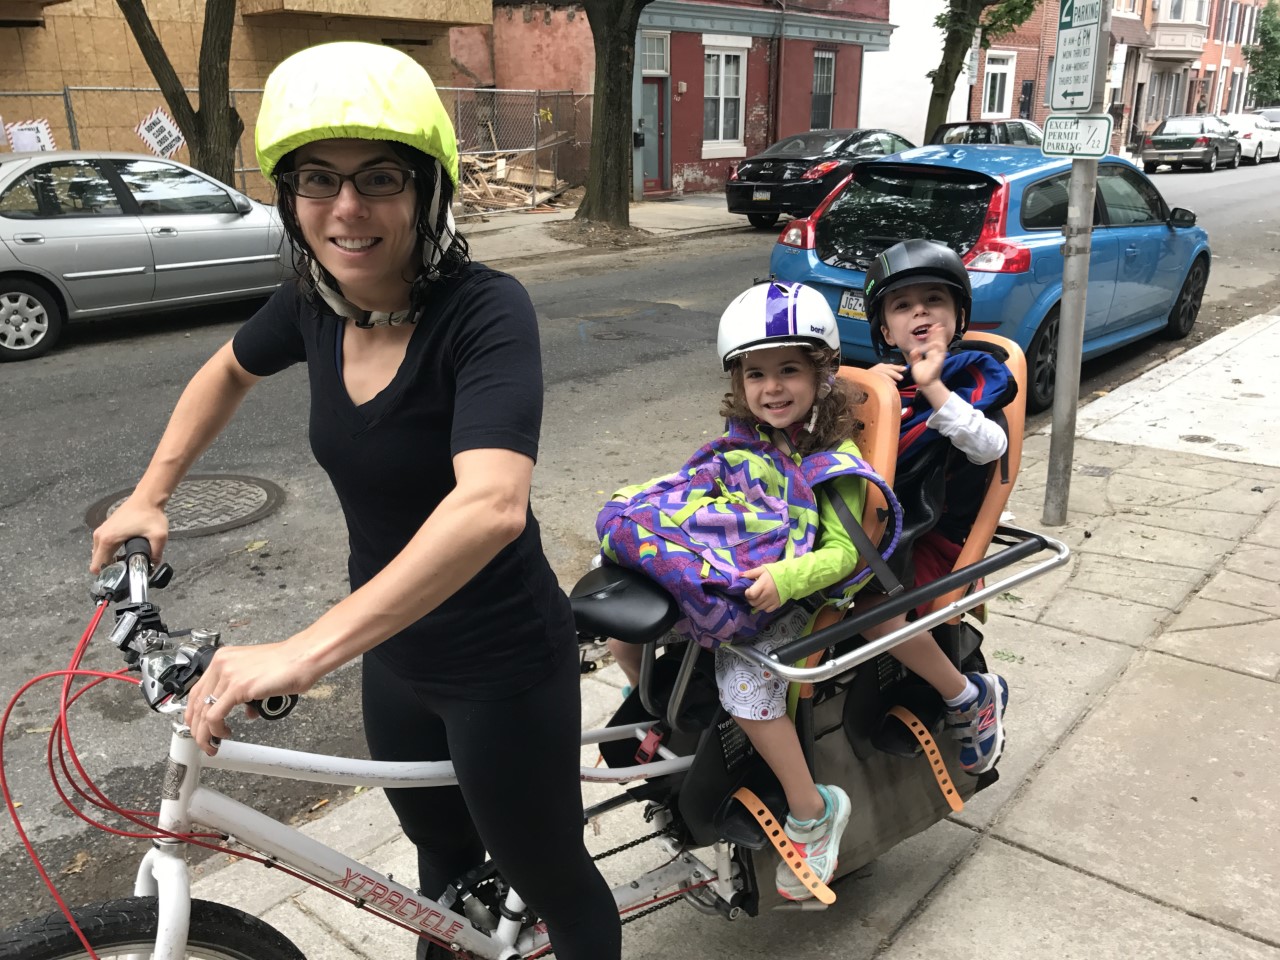 An adult with two children on a cargo bike post on the sidewalk